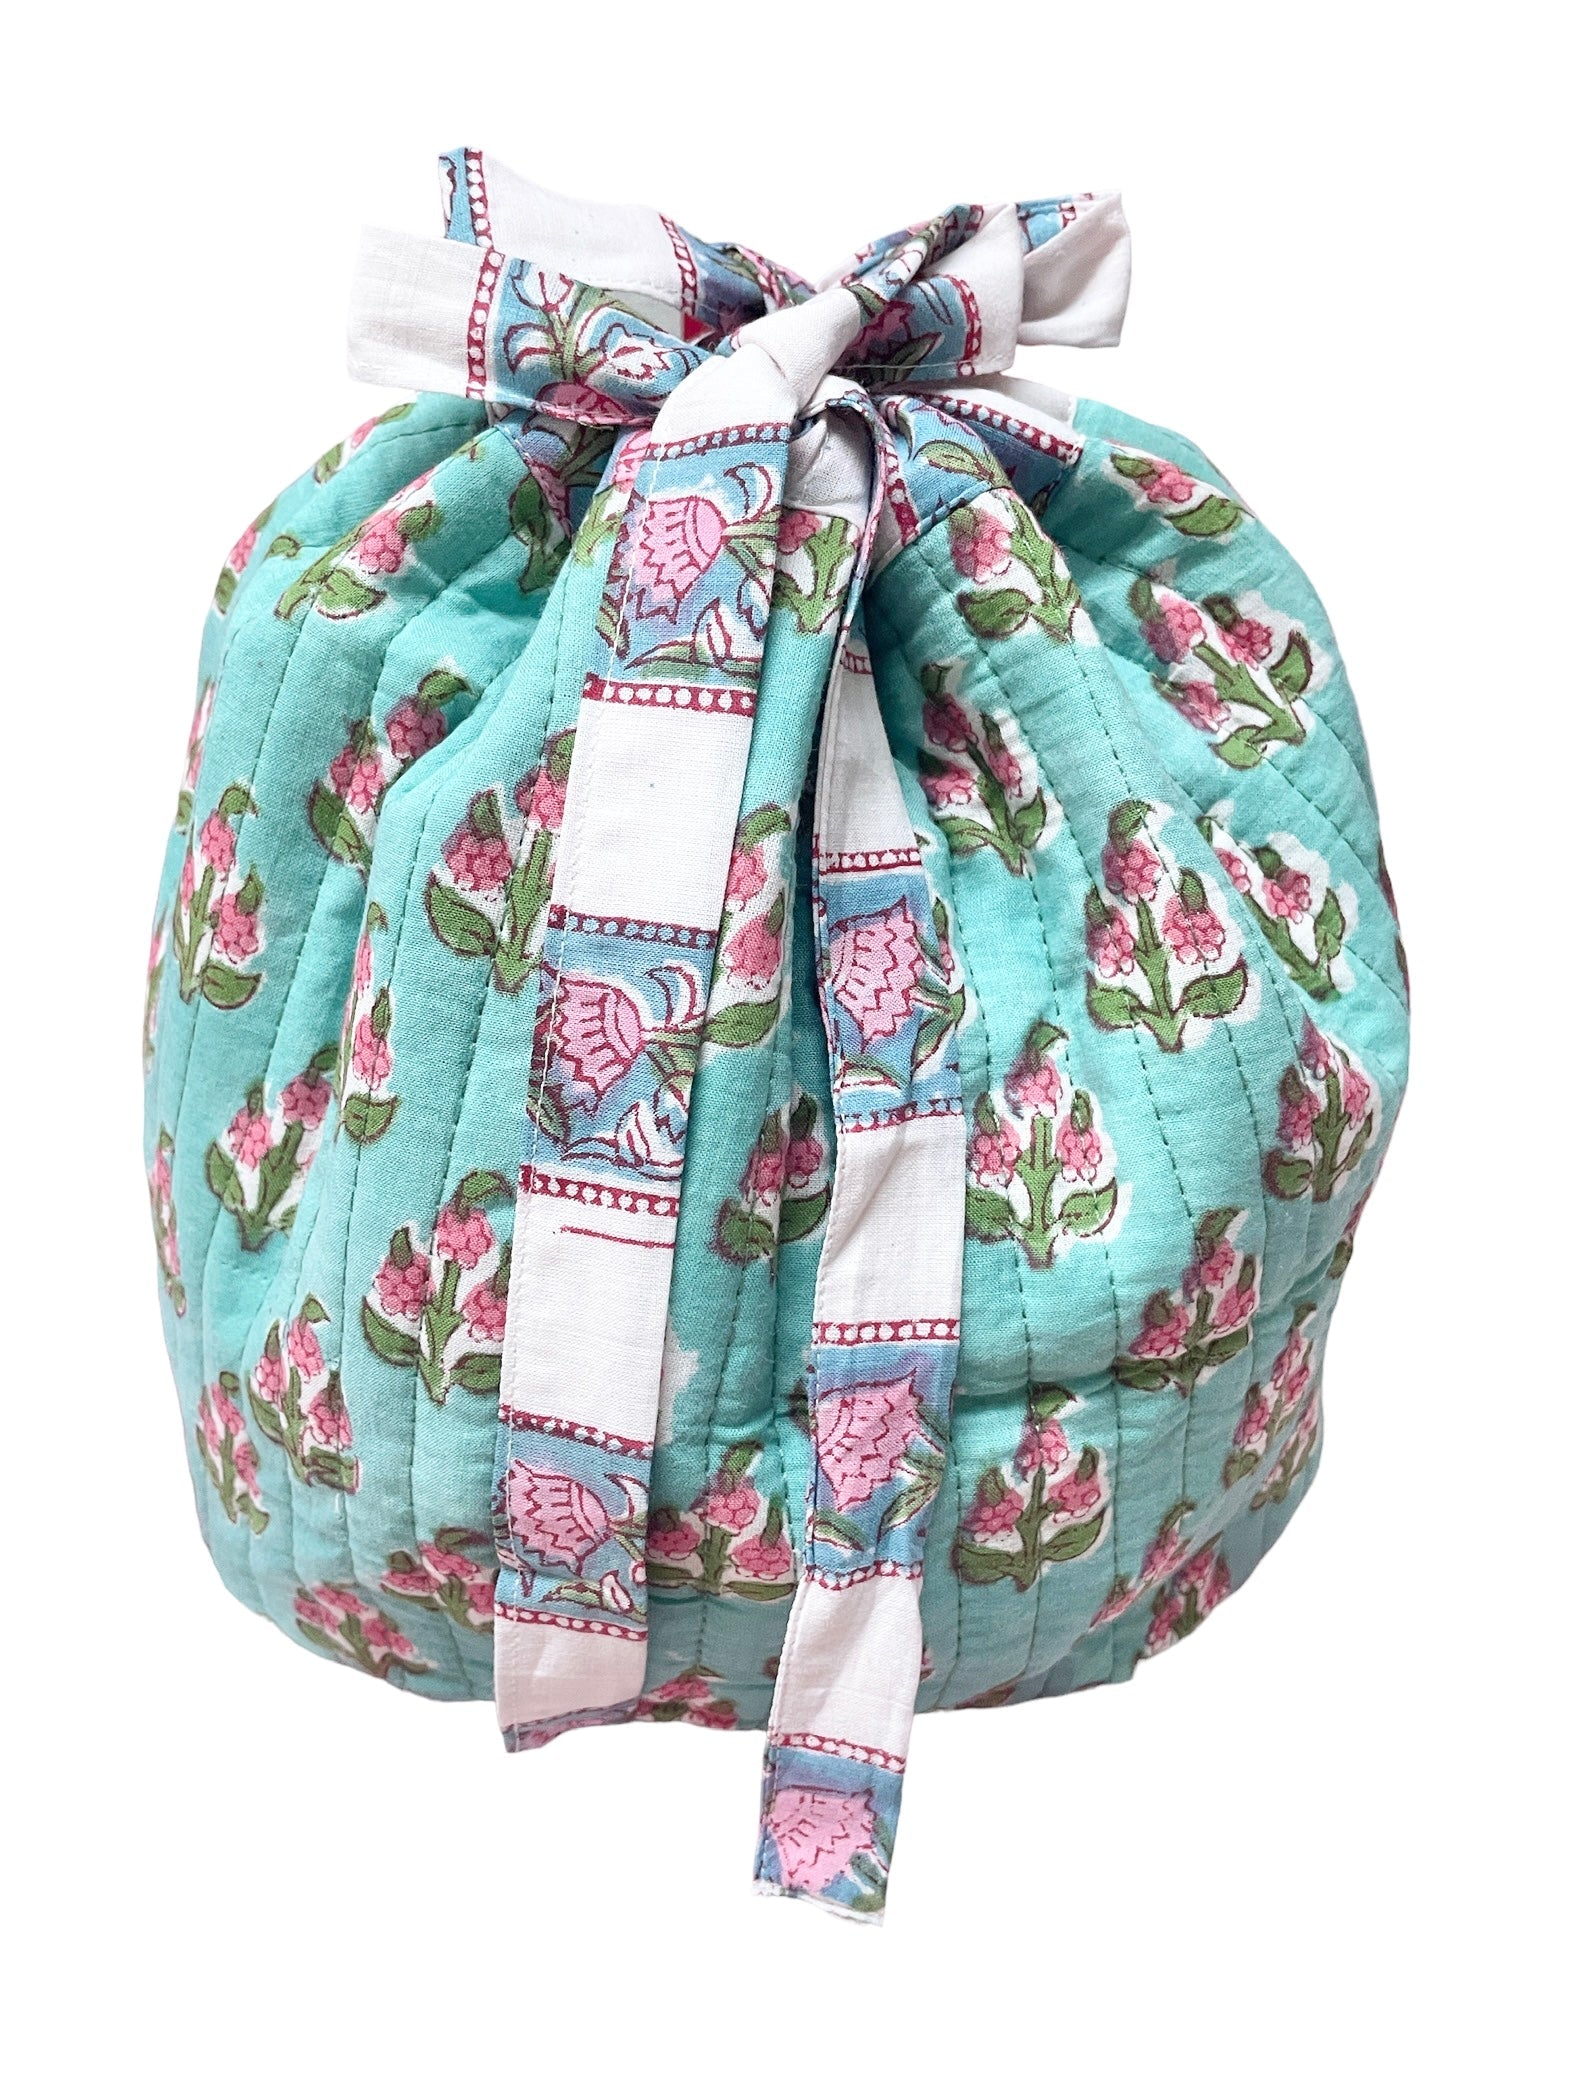 Forget Me Not Flower Motif Wash/Lotions & Potions Bag The Charpoy